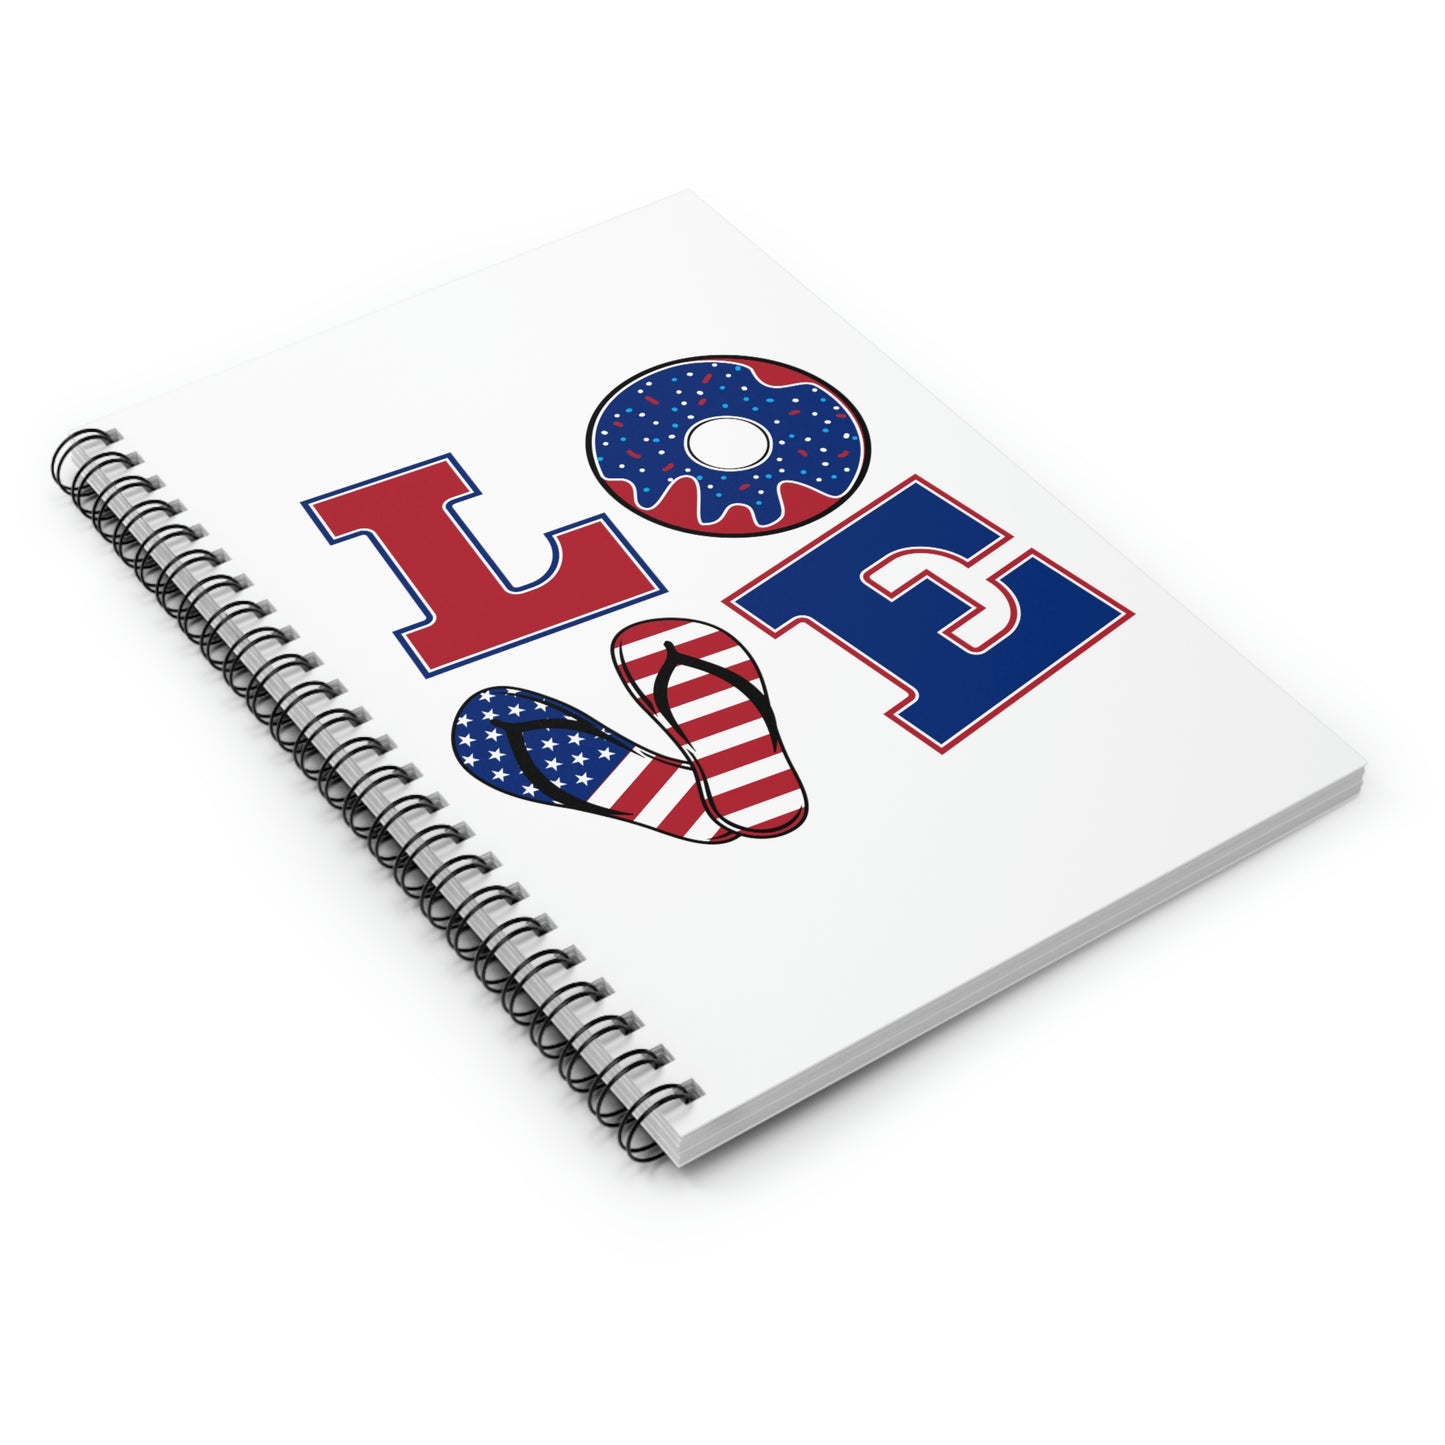 LOVE - Red White Blue Pattern Letters On A Field Of White Patriotic - Spiral Notebook - Ruled Line